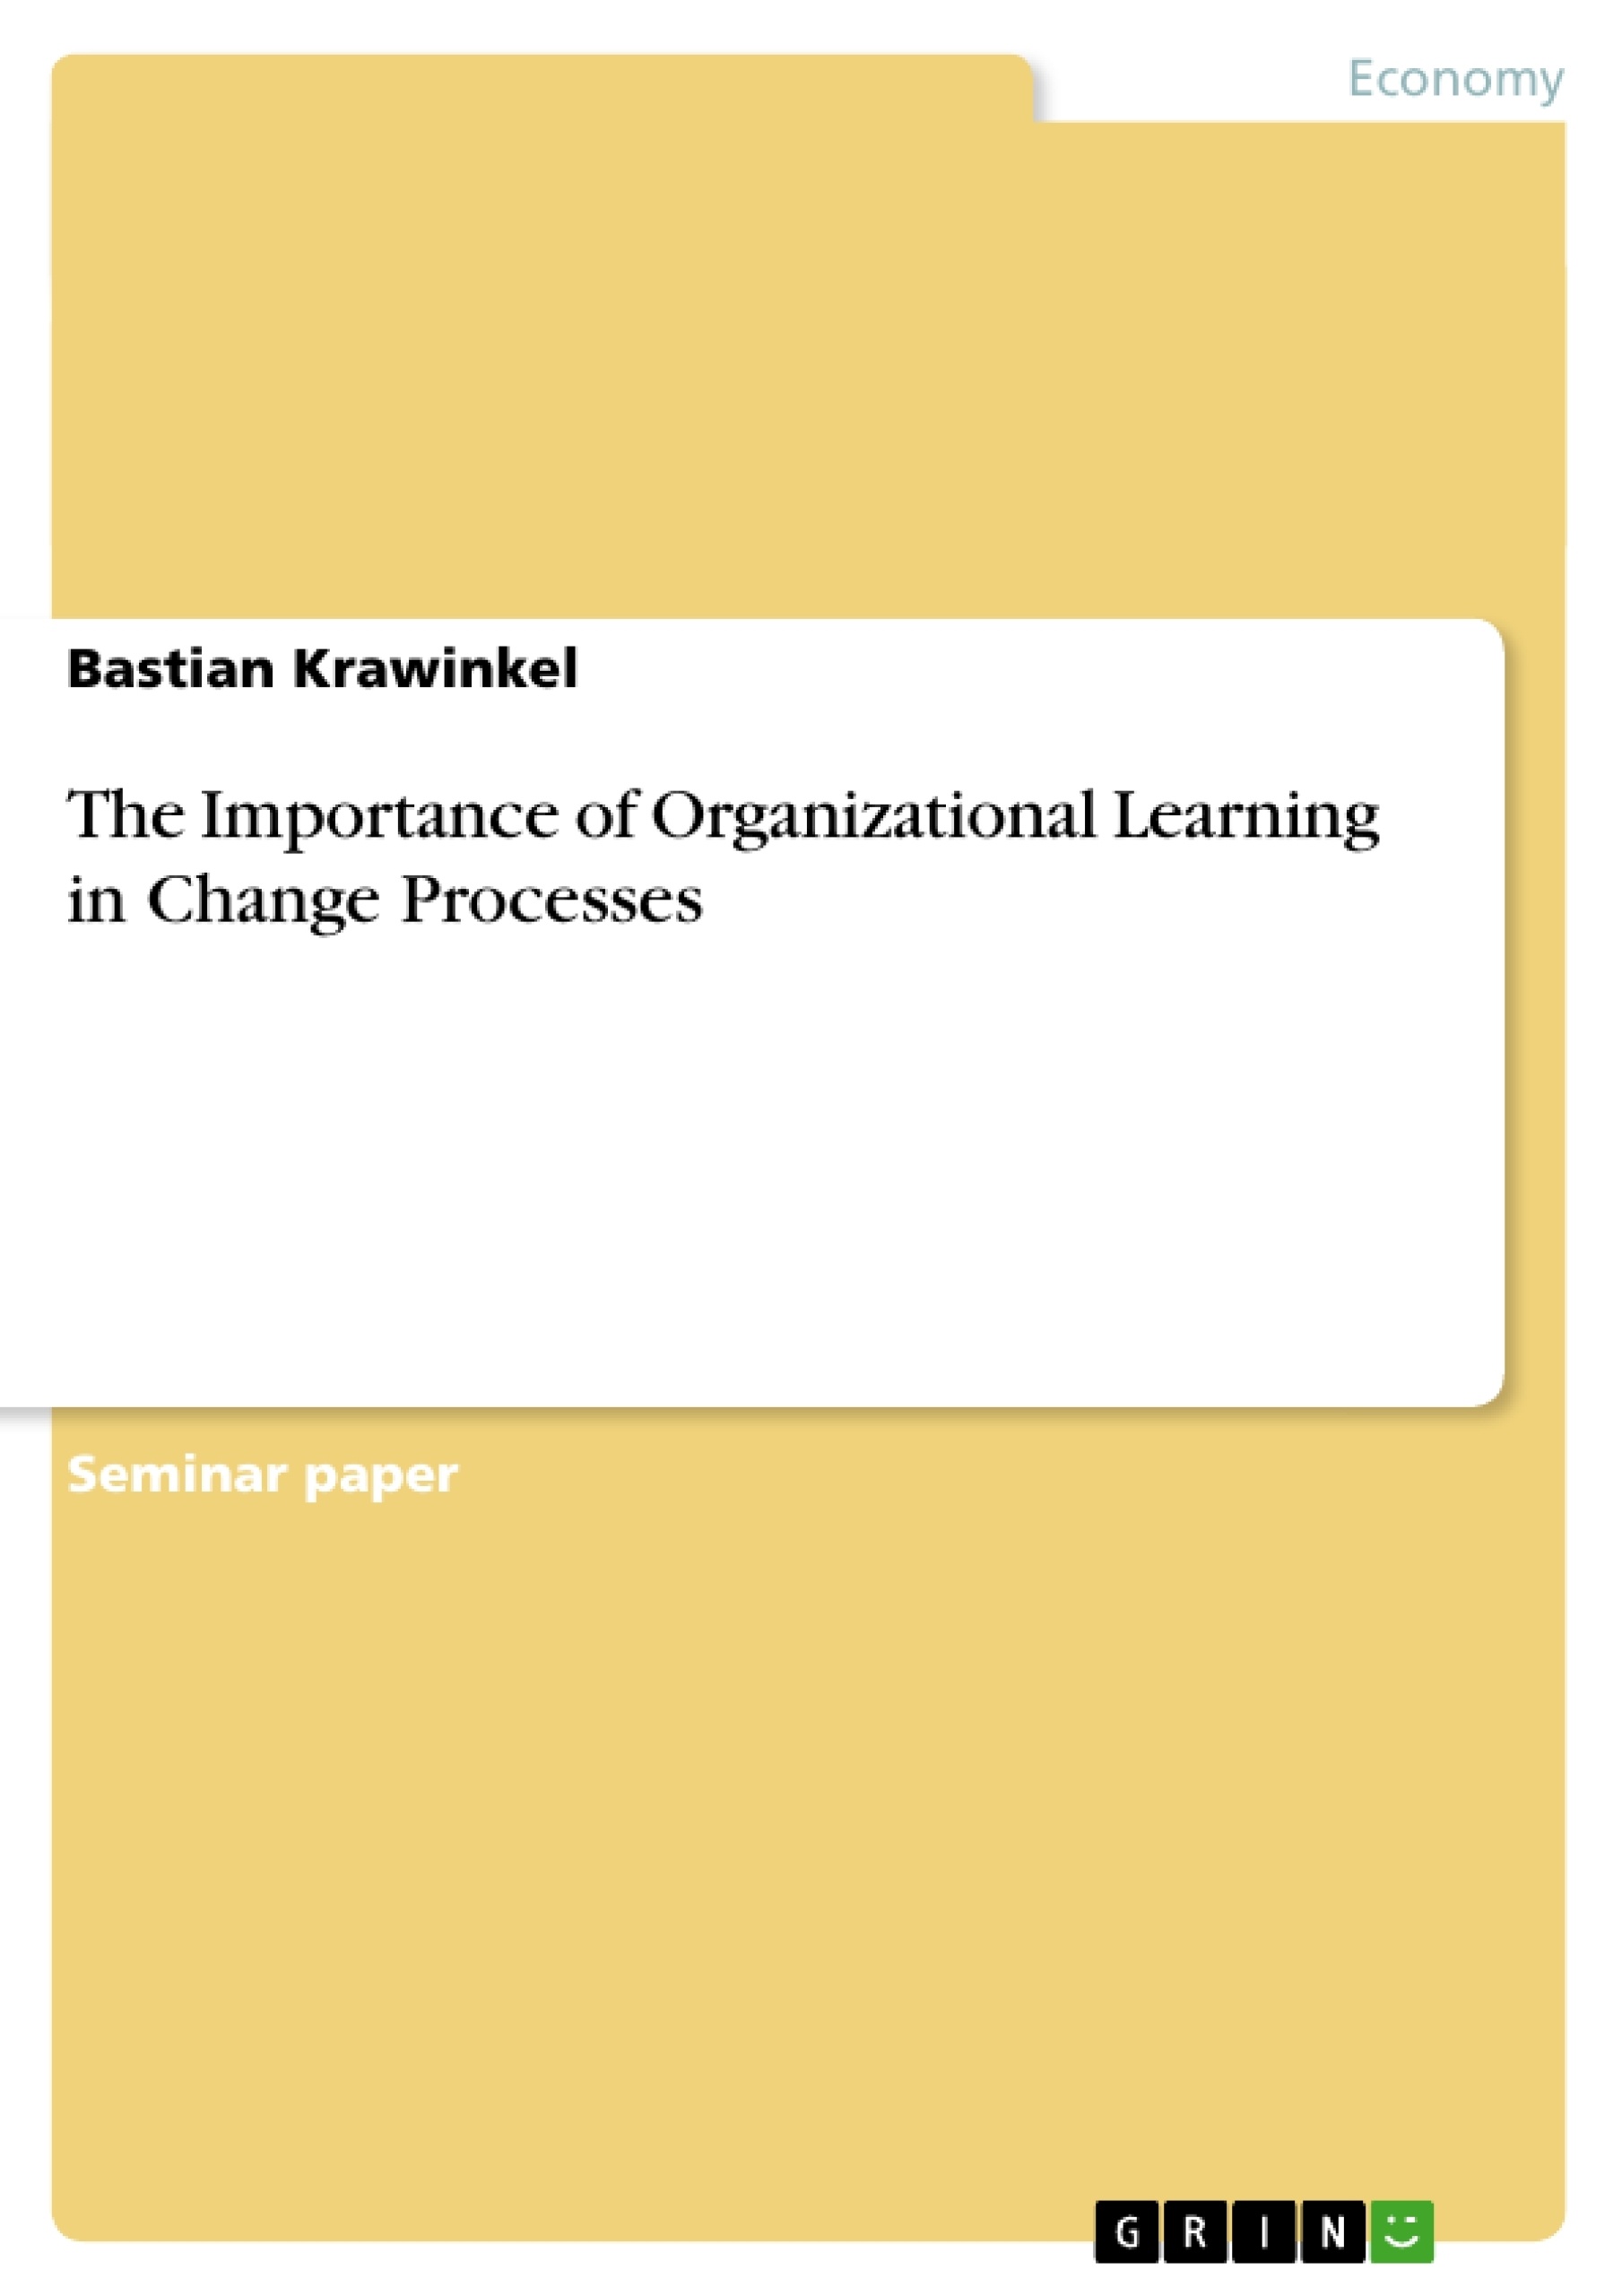 Title: The Importance of Organizational Learning in Change Processes